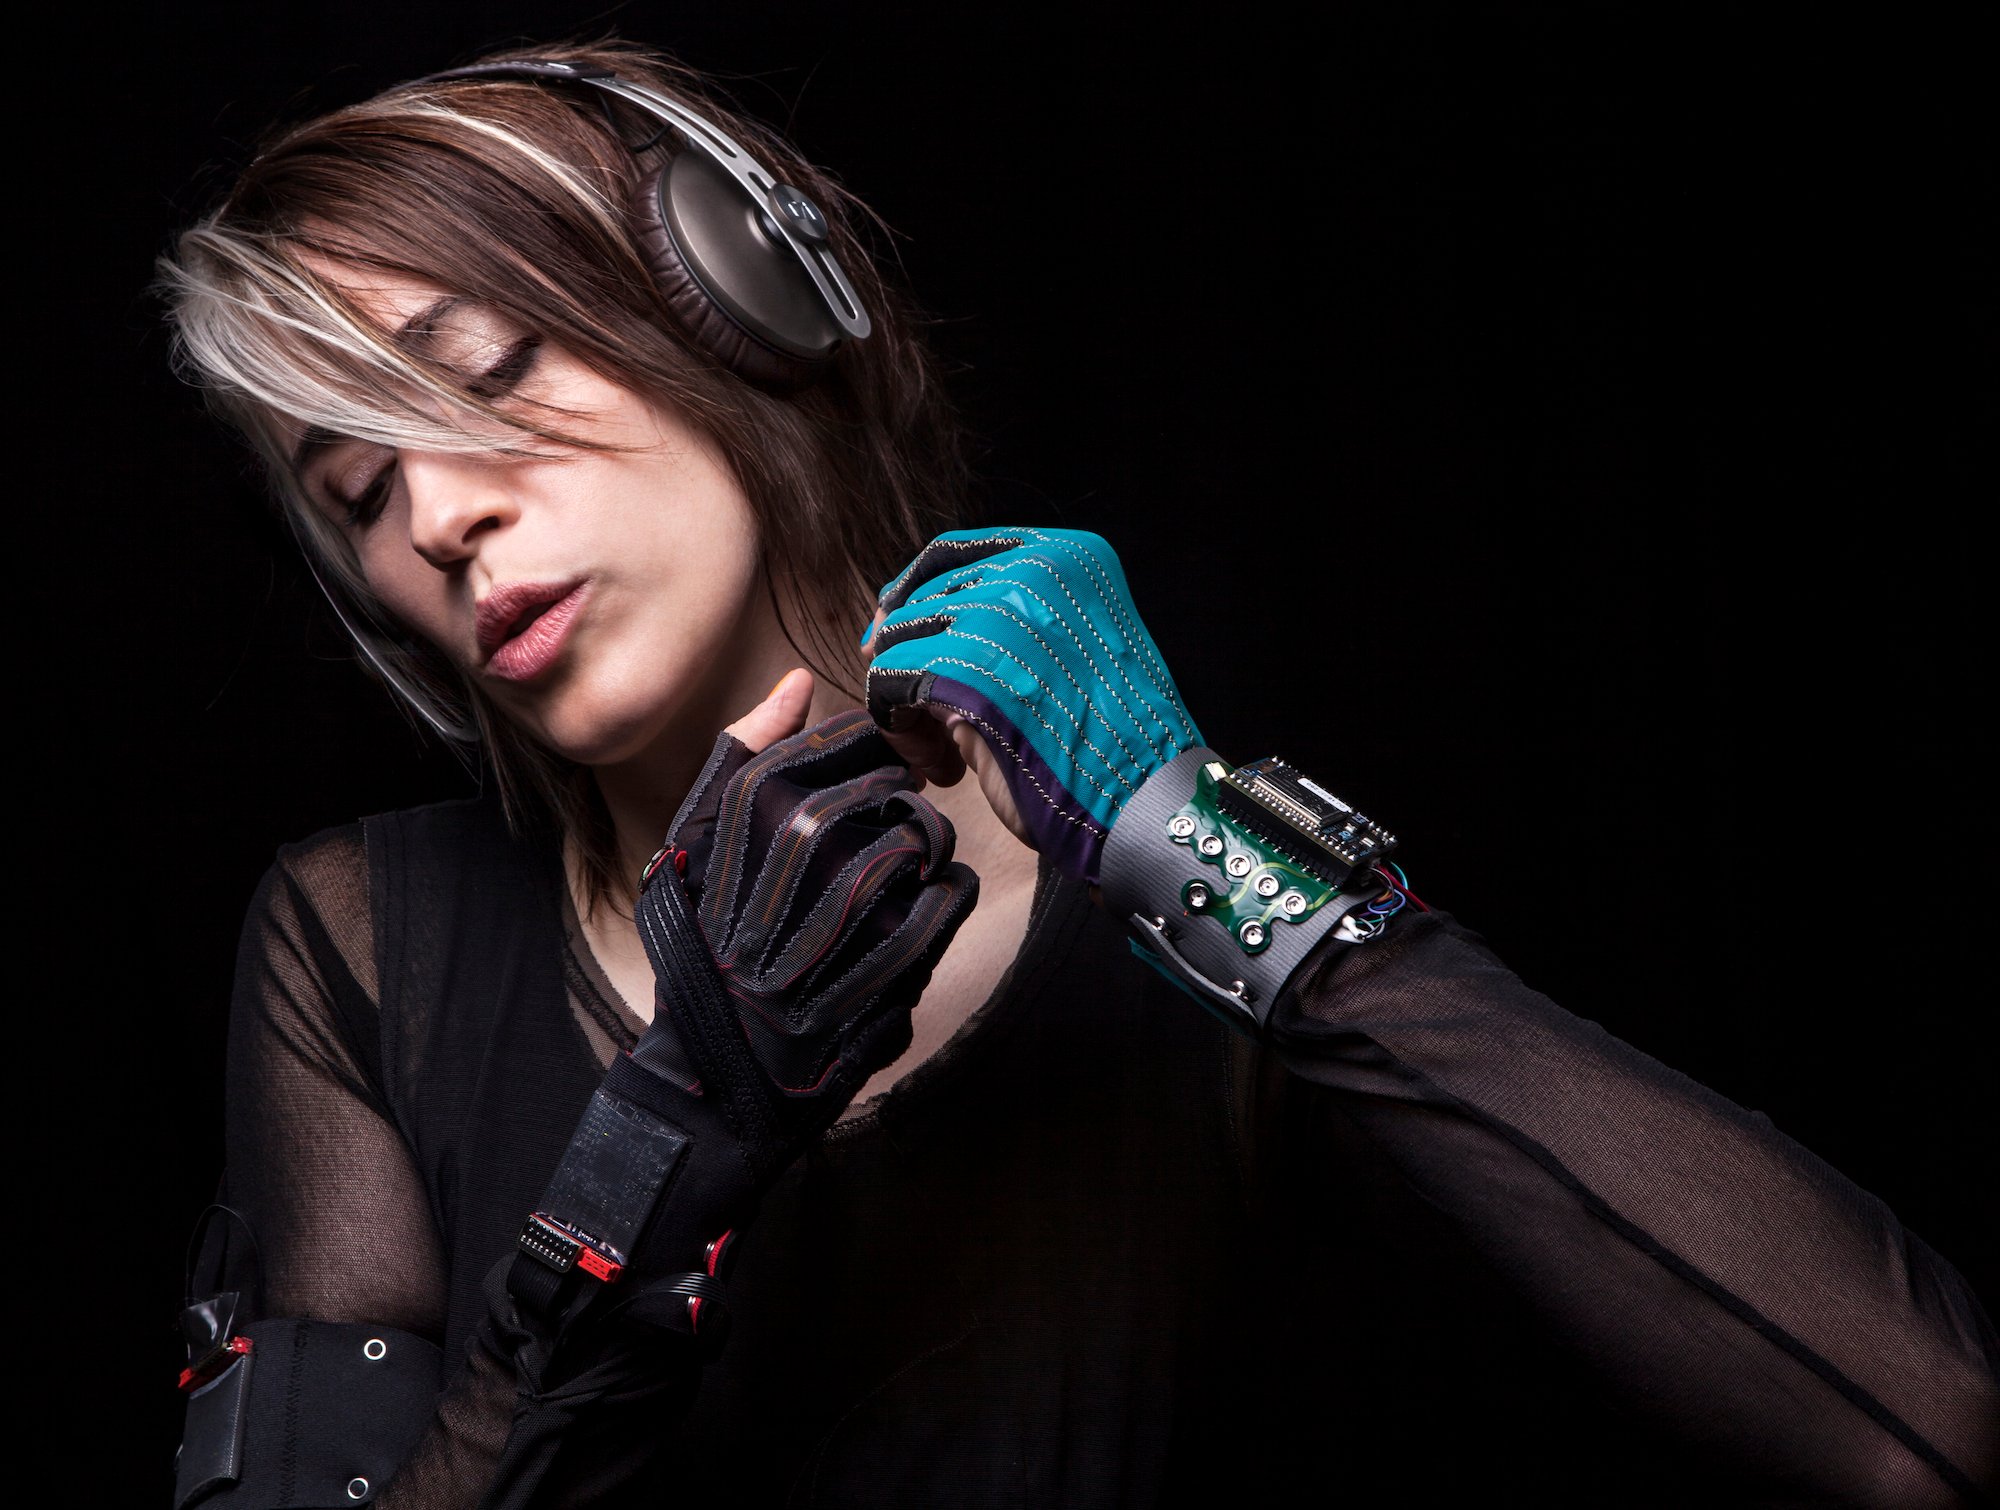 Imogen Heap Innovates Music Production With Wearable Technology Project